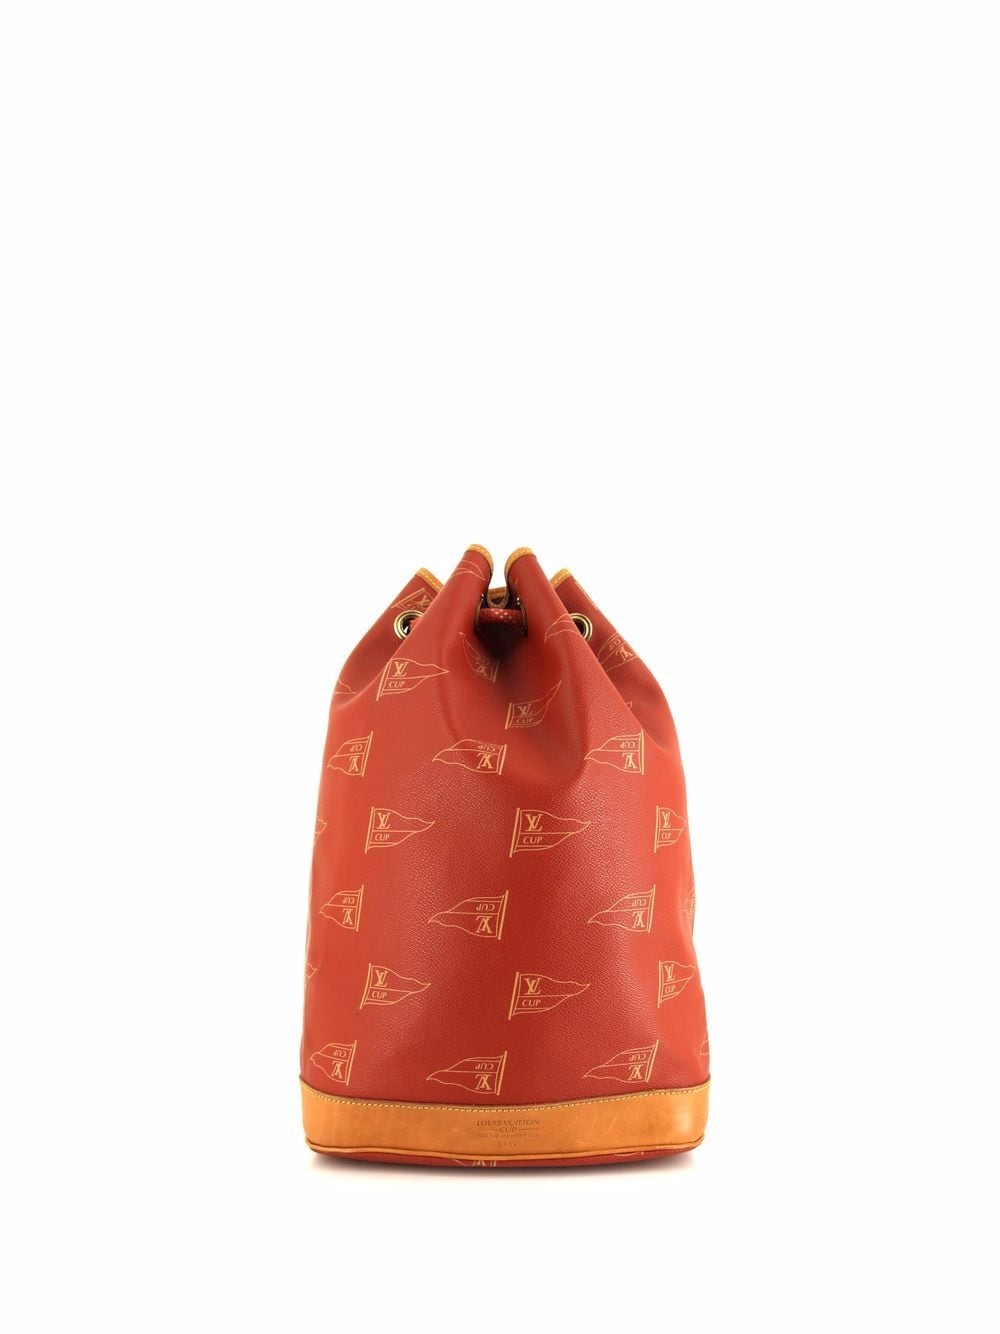 Louis Vuitton 1994 pre-owned America's Cup Bucket Bag - Farfetch